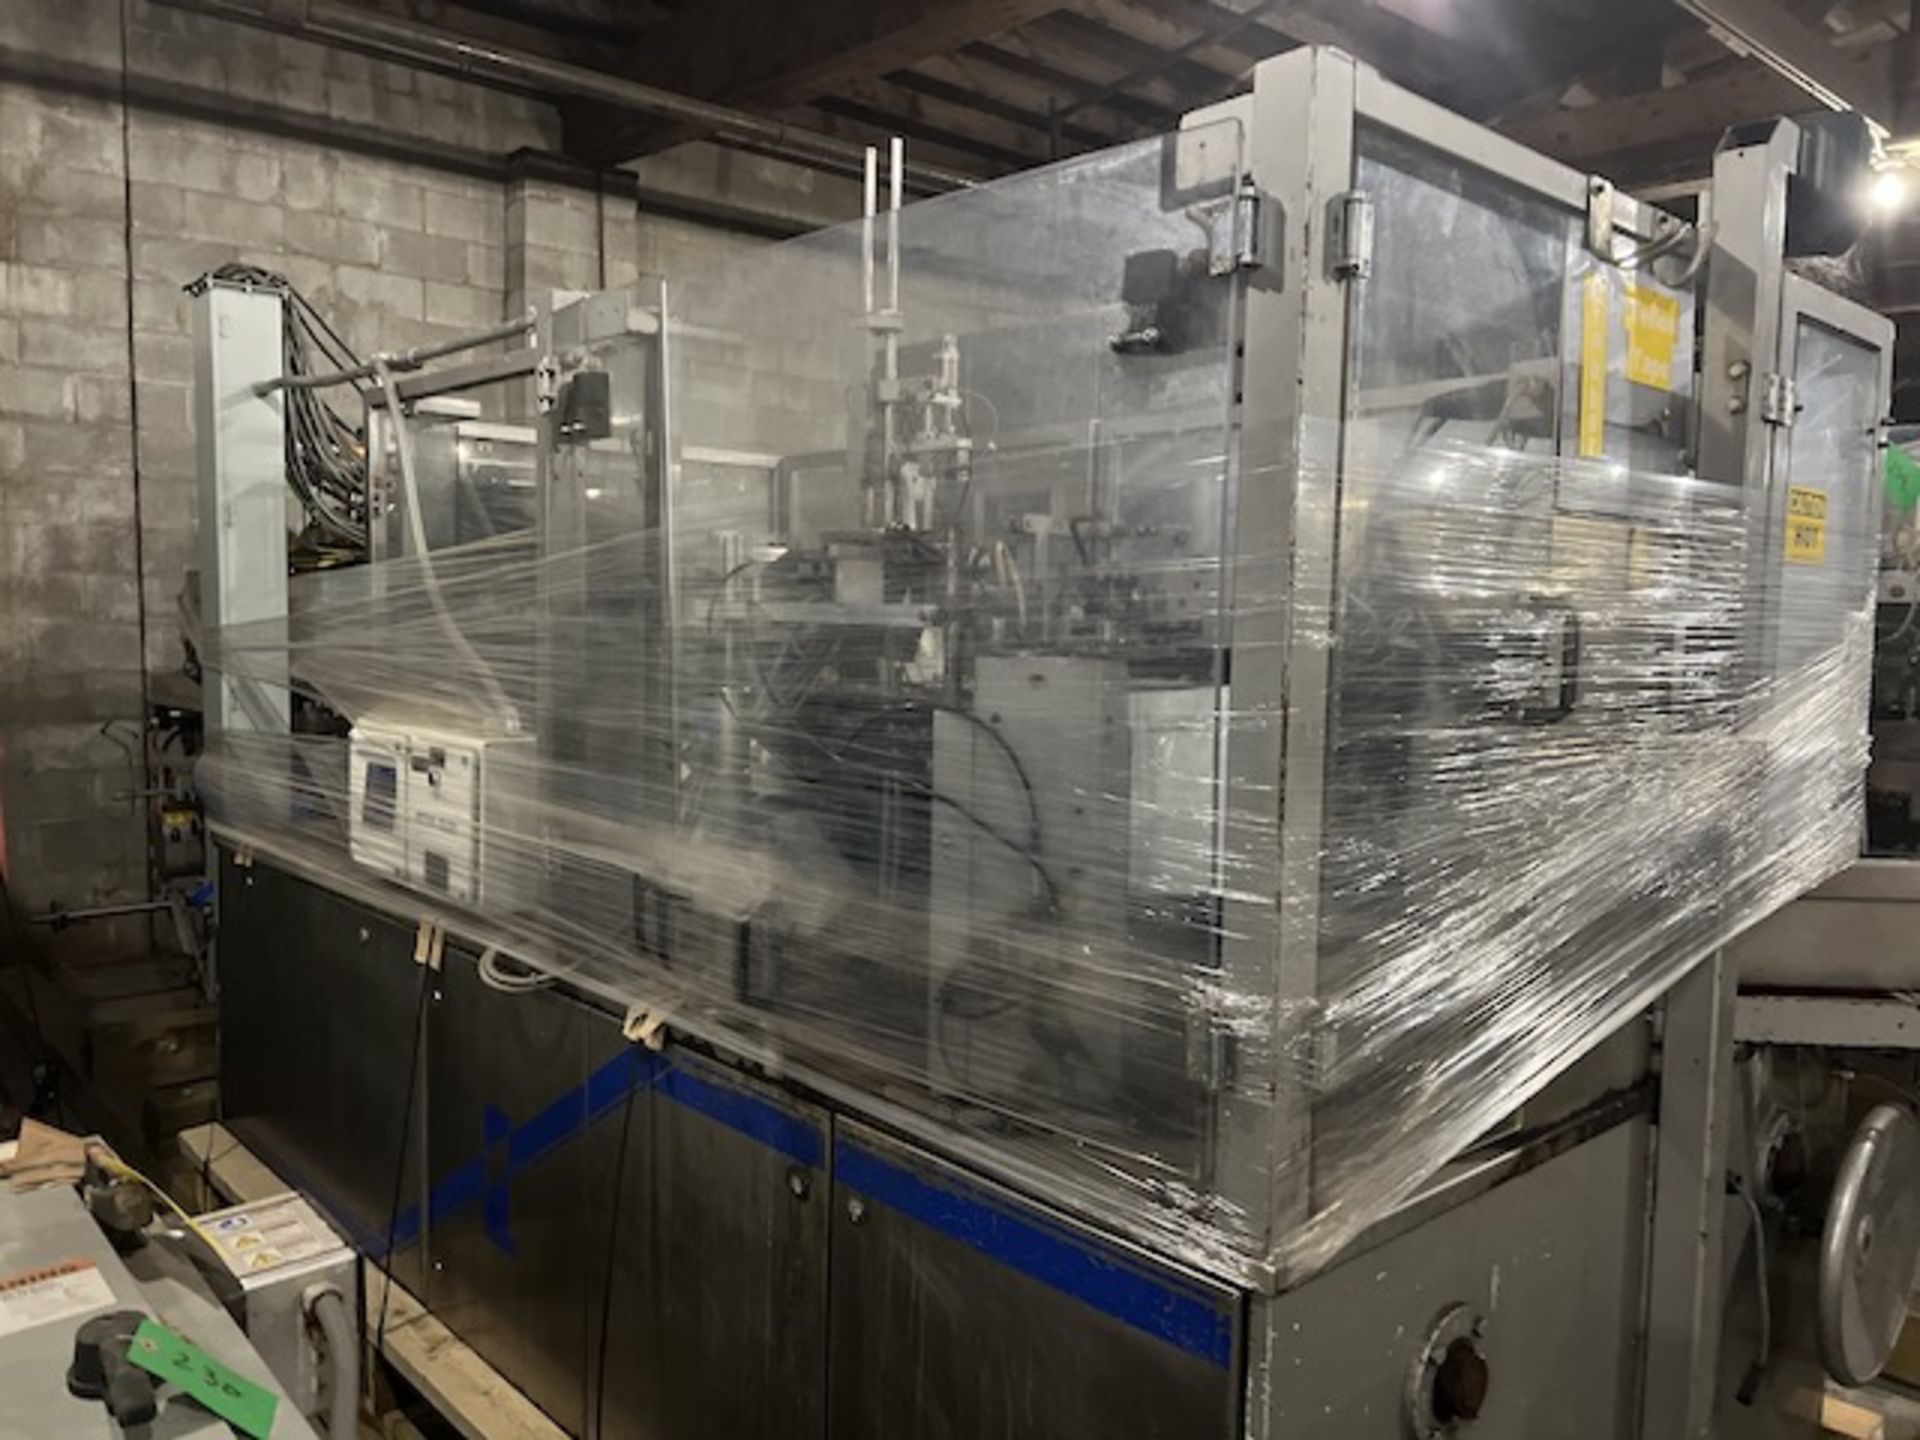 Laudenberg Verpackungsmaschinen Rotary Forming/Filling Machine, Model #FBM-20,, Located in Ottawa, - Image 12 of 17